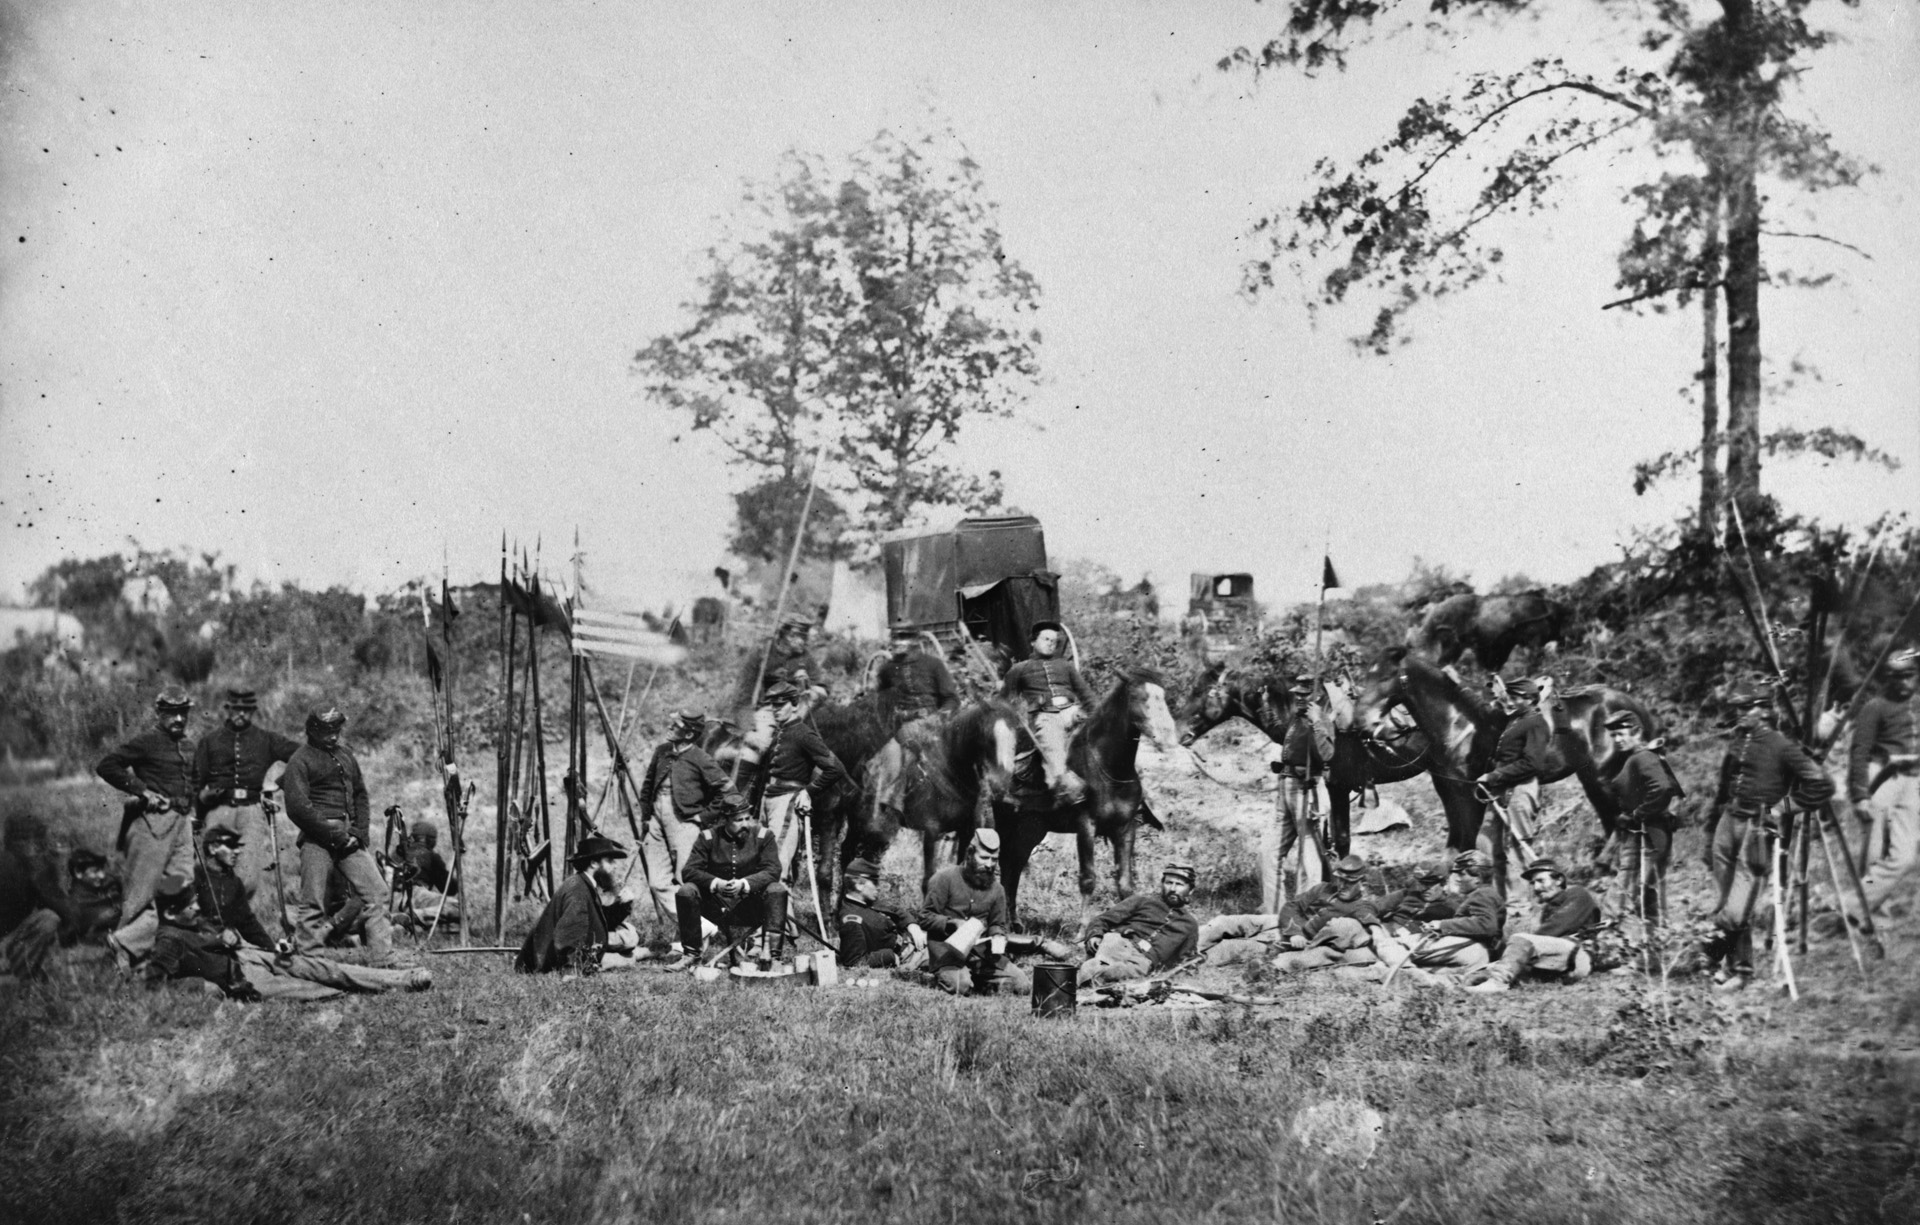 Troopers of the 6th Pennsylvania Cavalry, part of the Reserve brigade of Brig. Gen. John Buford’s First Division, photographed shortly after the battle. The regiment was in the thick of the fighting on the Union right flank. 